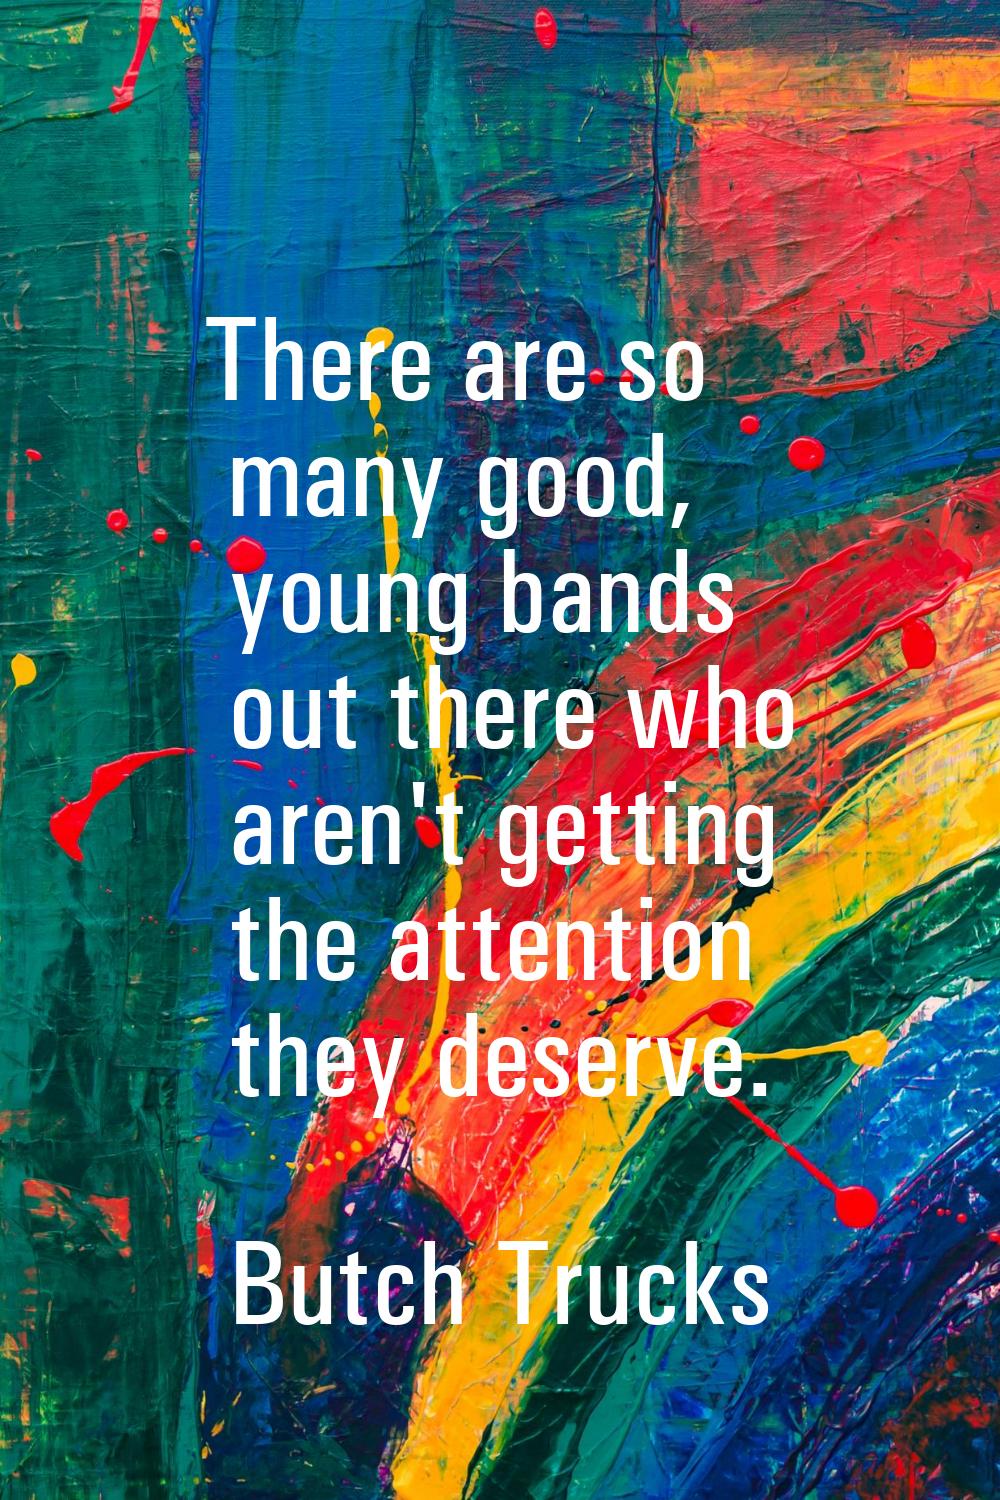 There are so many good, young bands out there who aren't getting the attention they deserve.